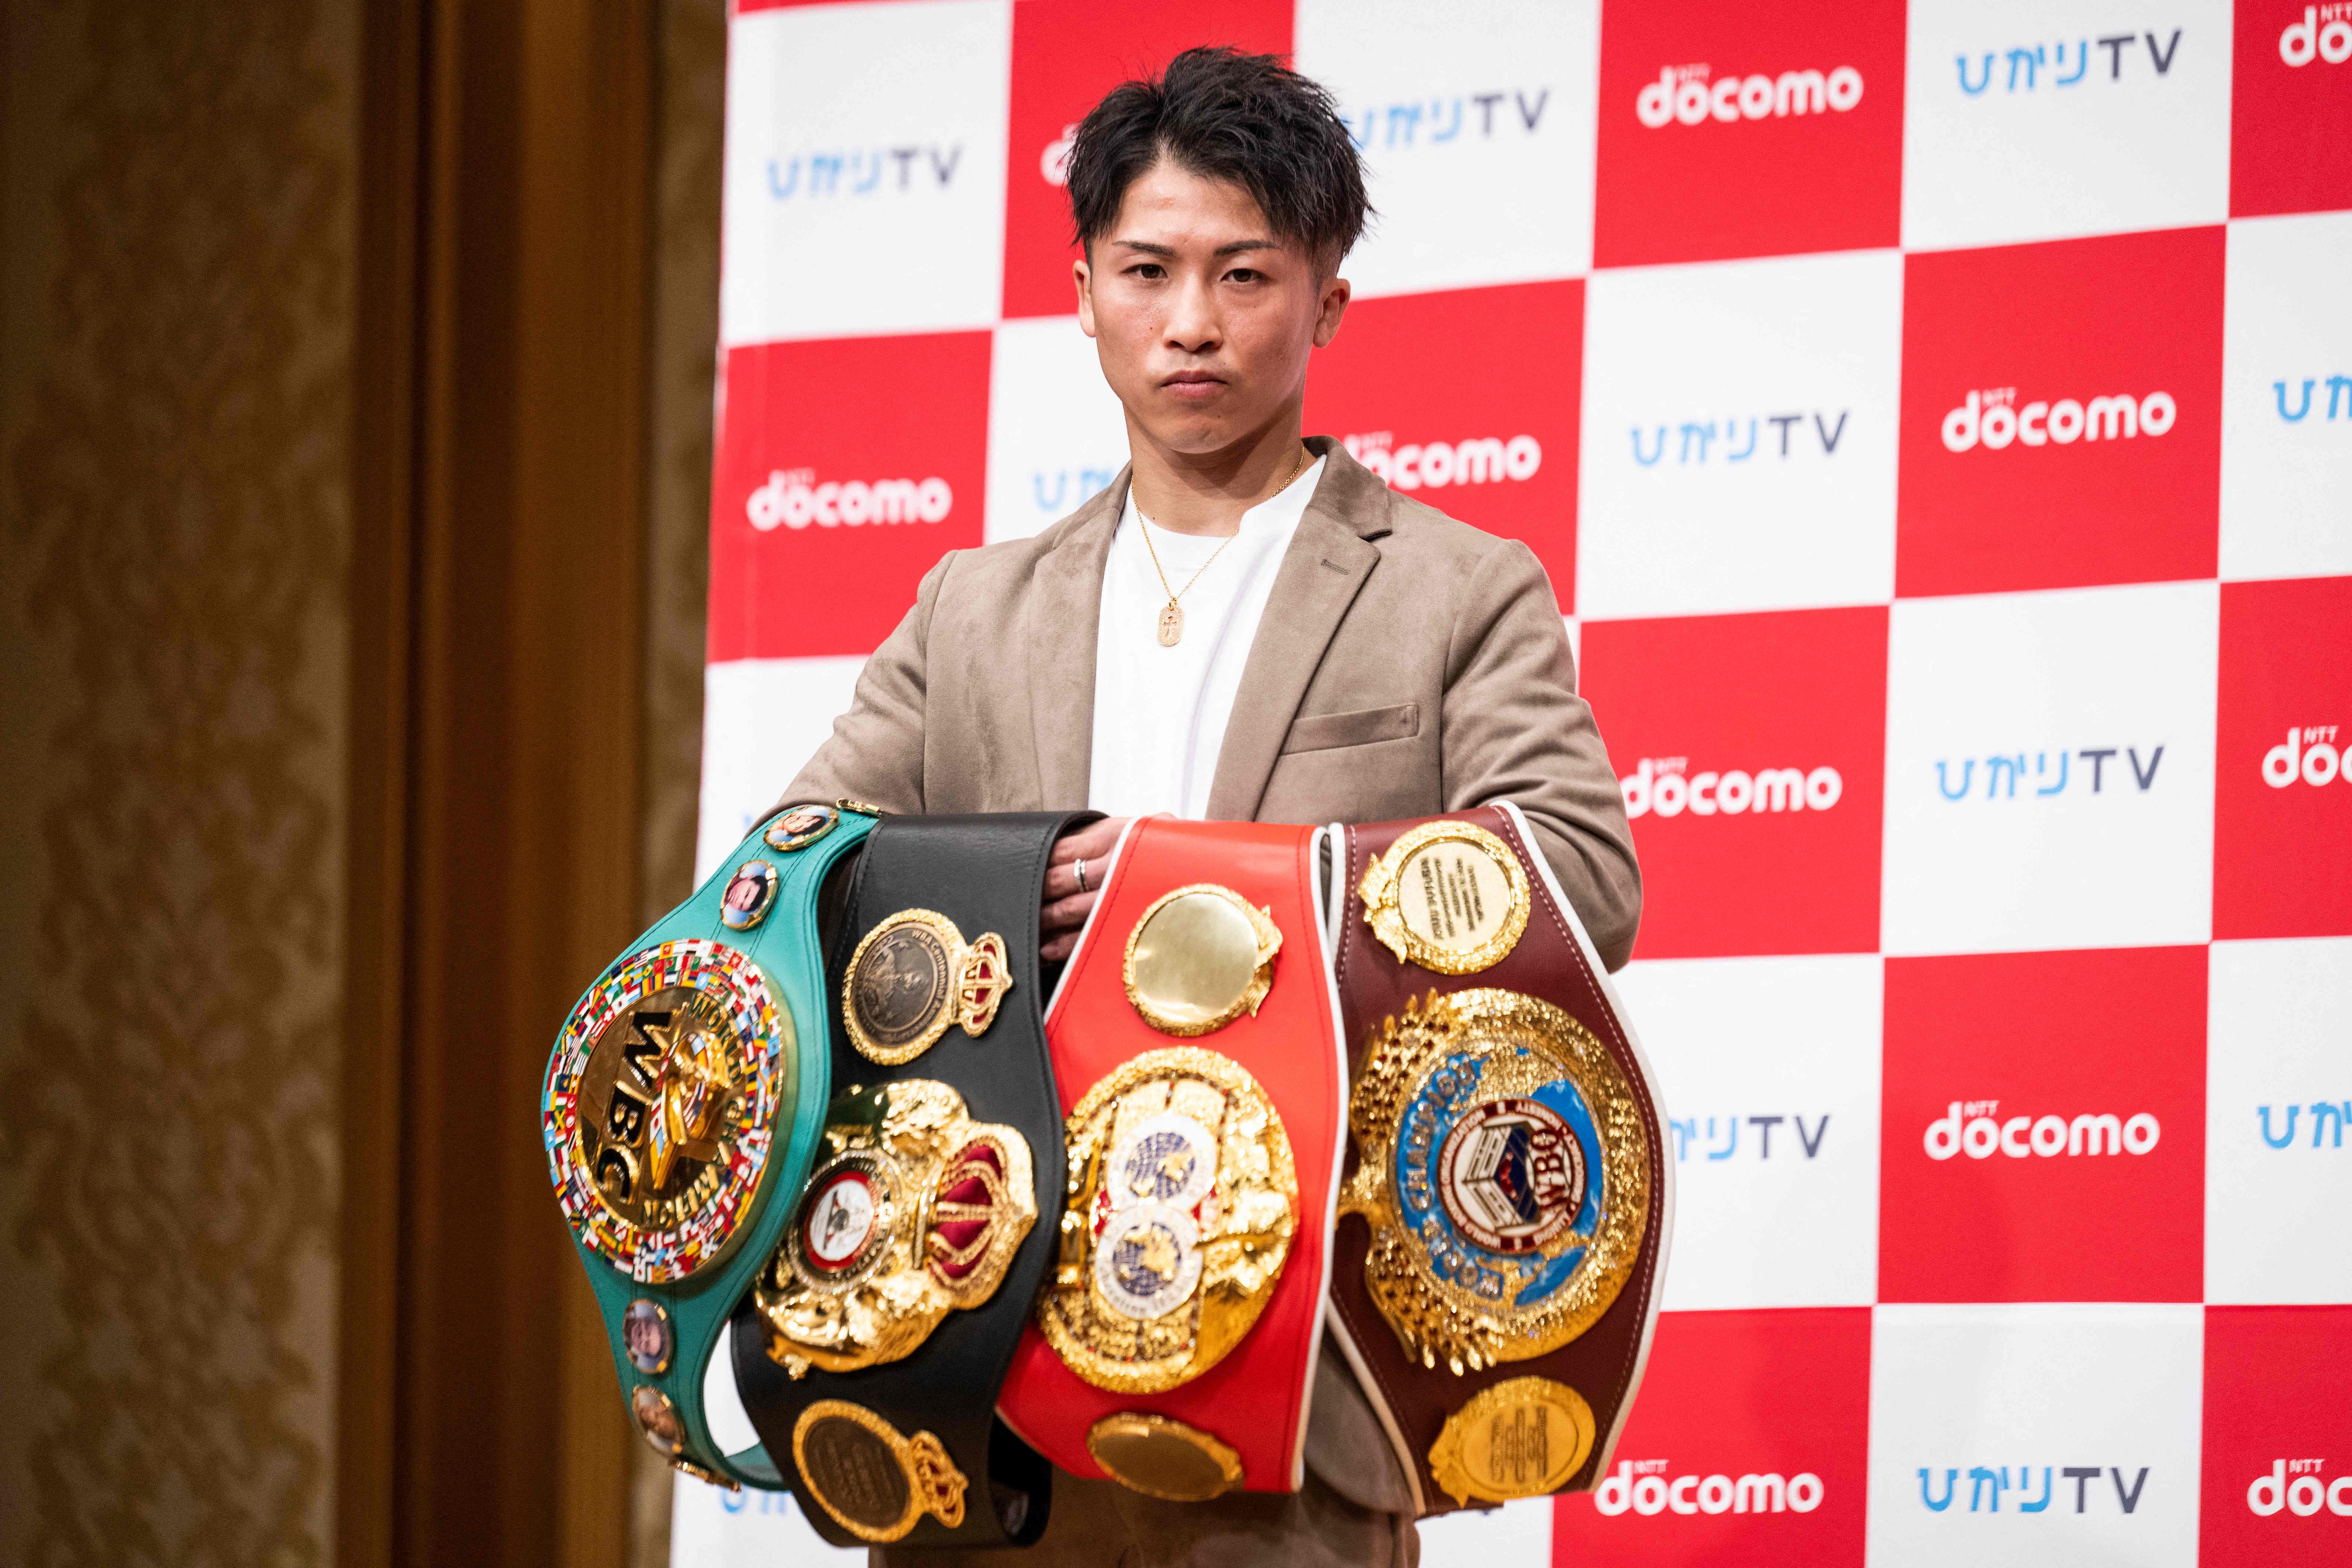 Naoya Inoue poses with his major world titles as he looks to take on more challenges in a new division.